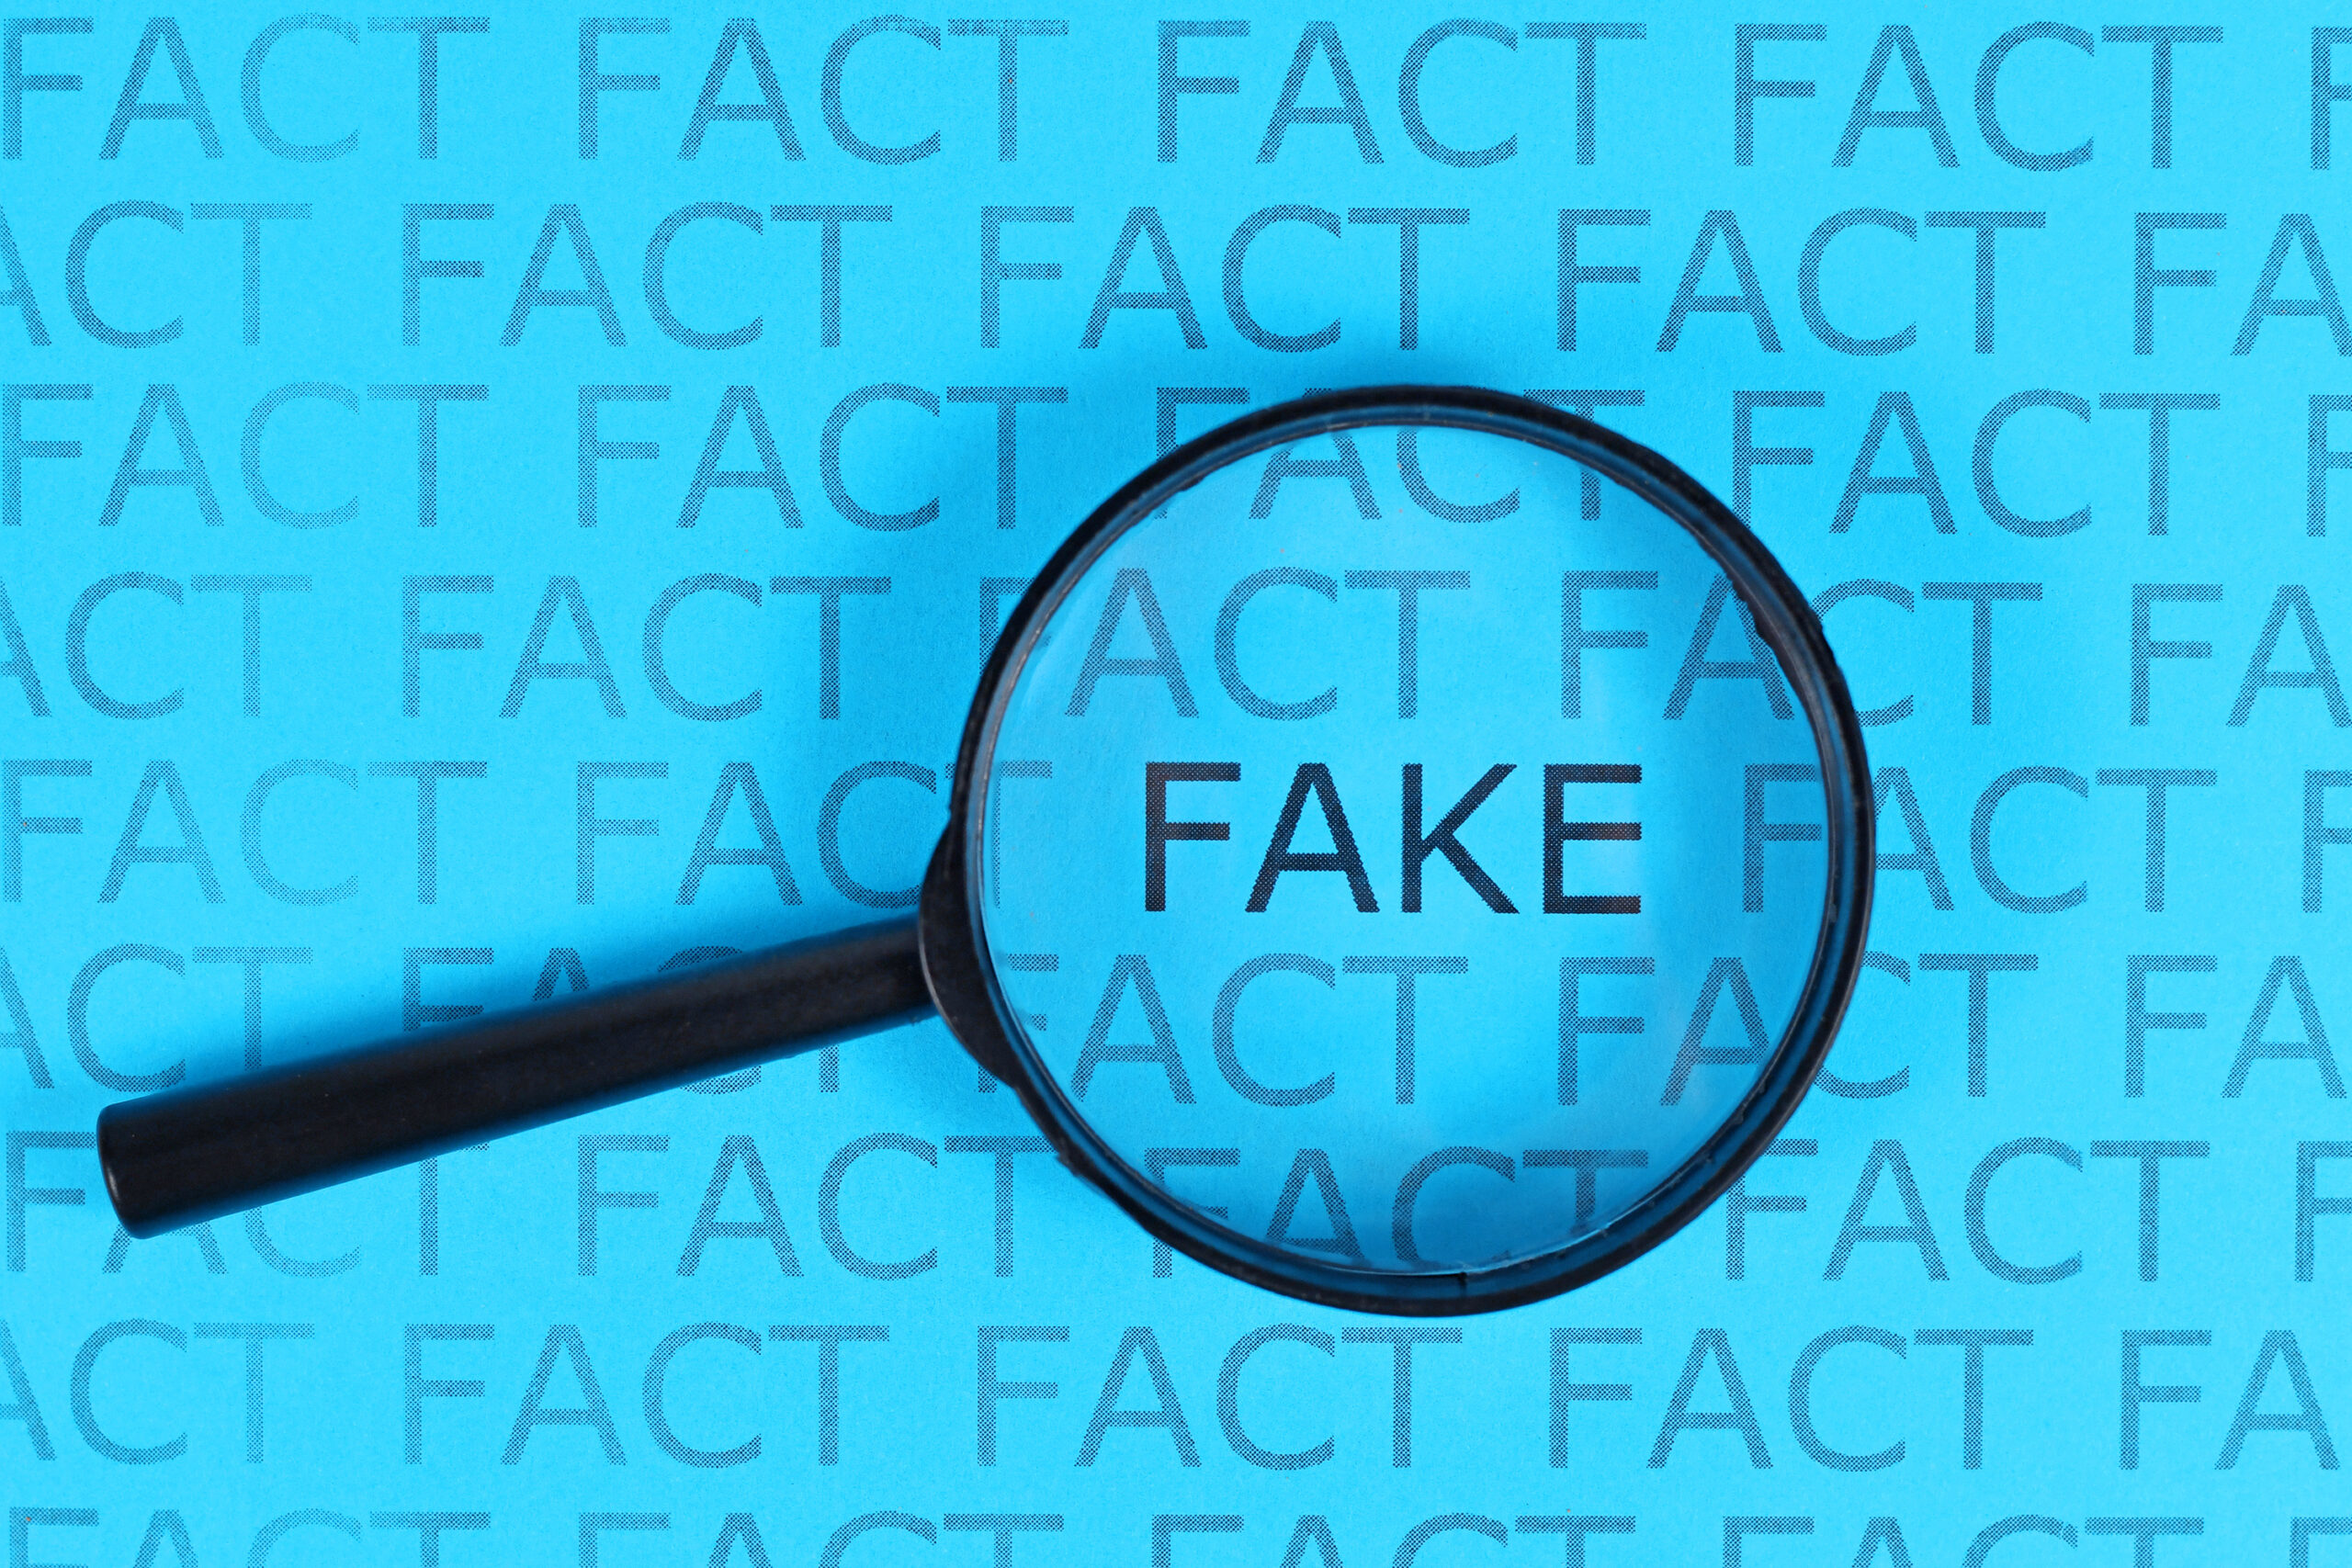 Fact-checking conference and workshop on September 15 & 16 in Bonn